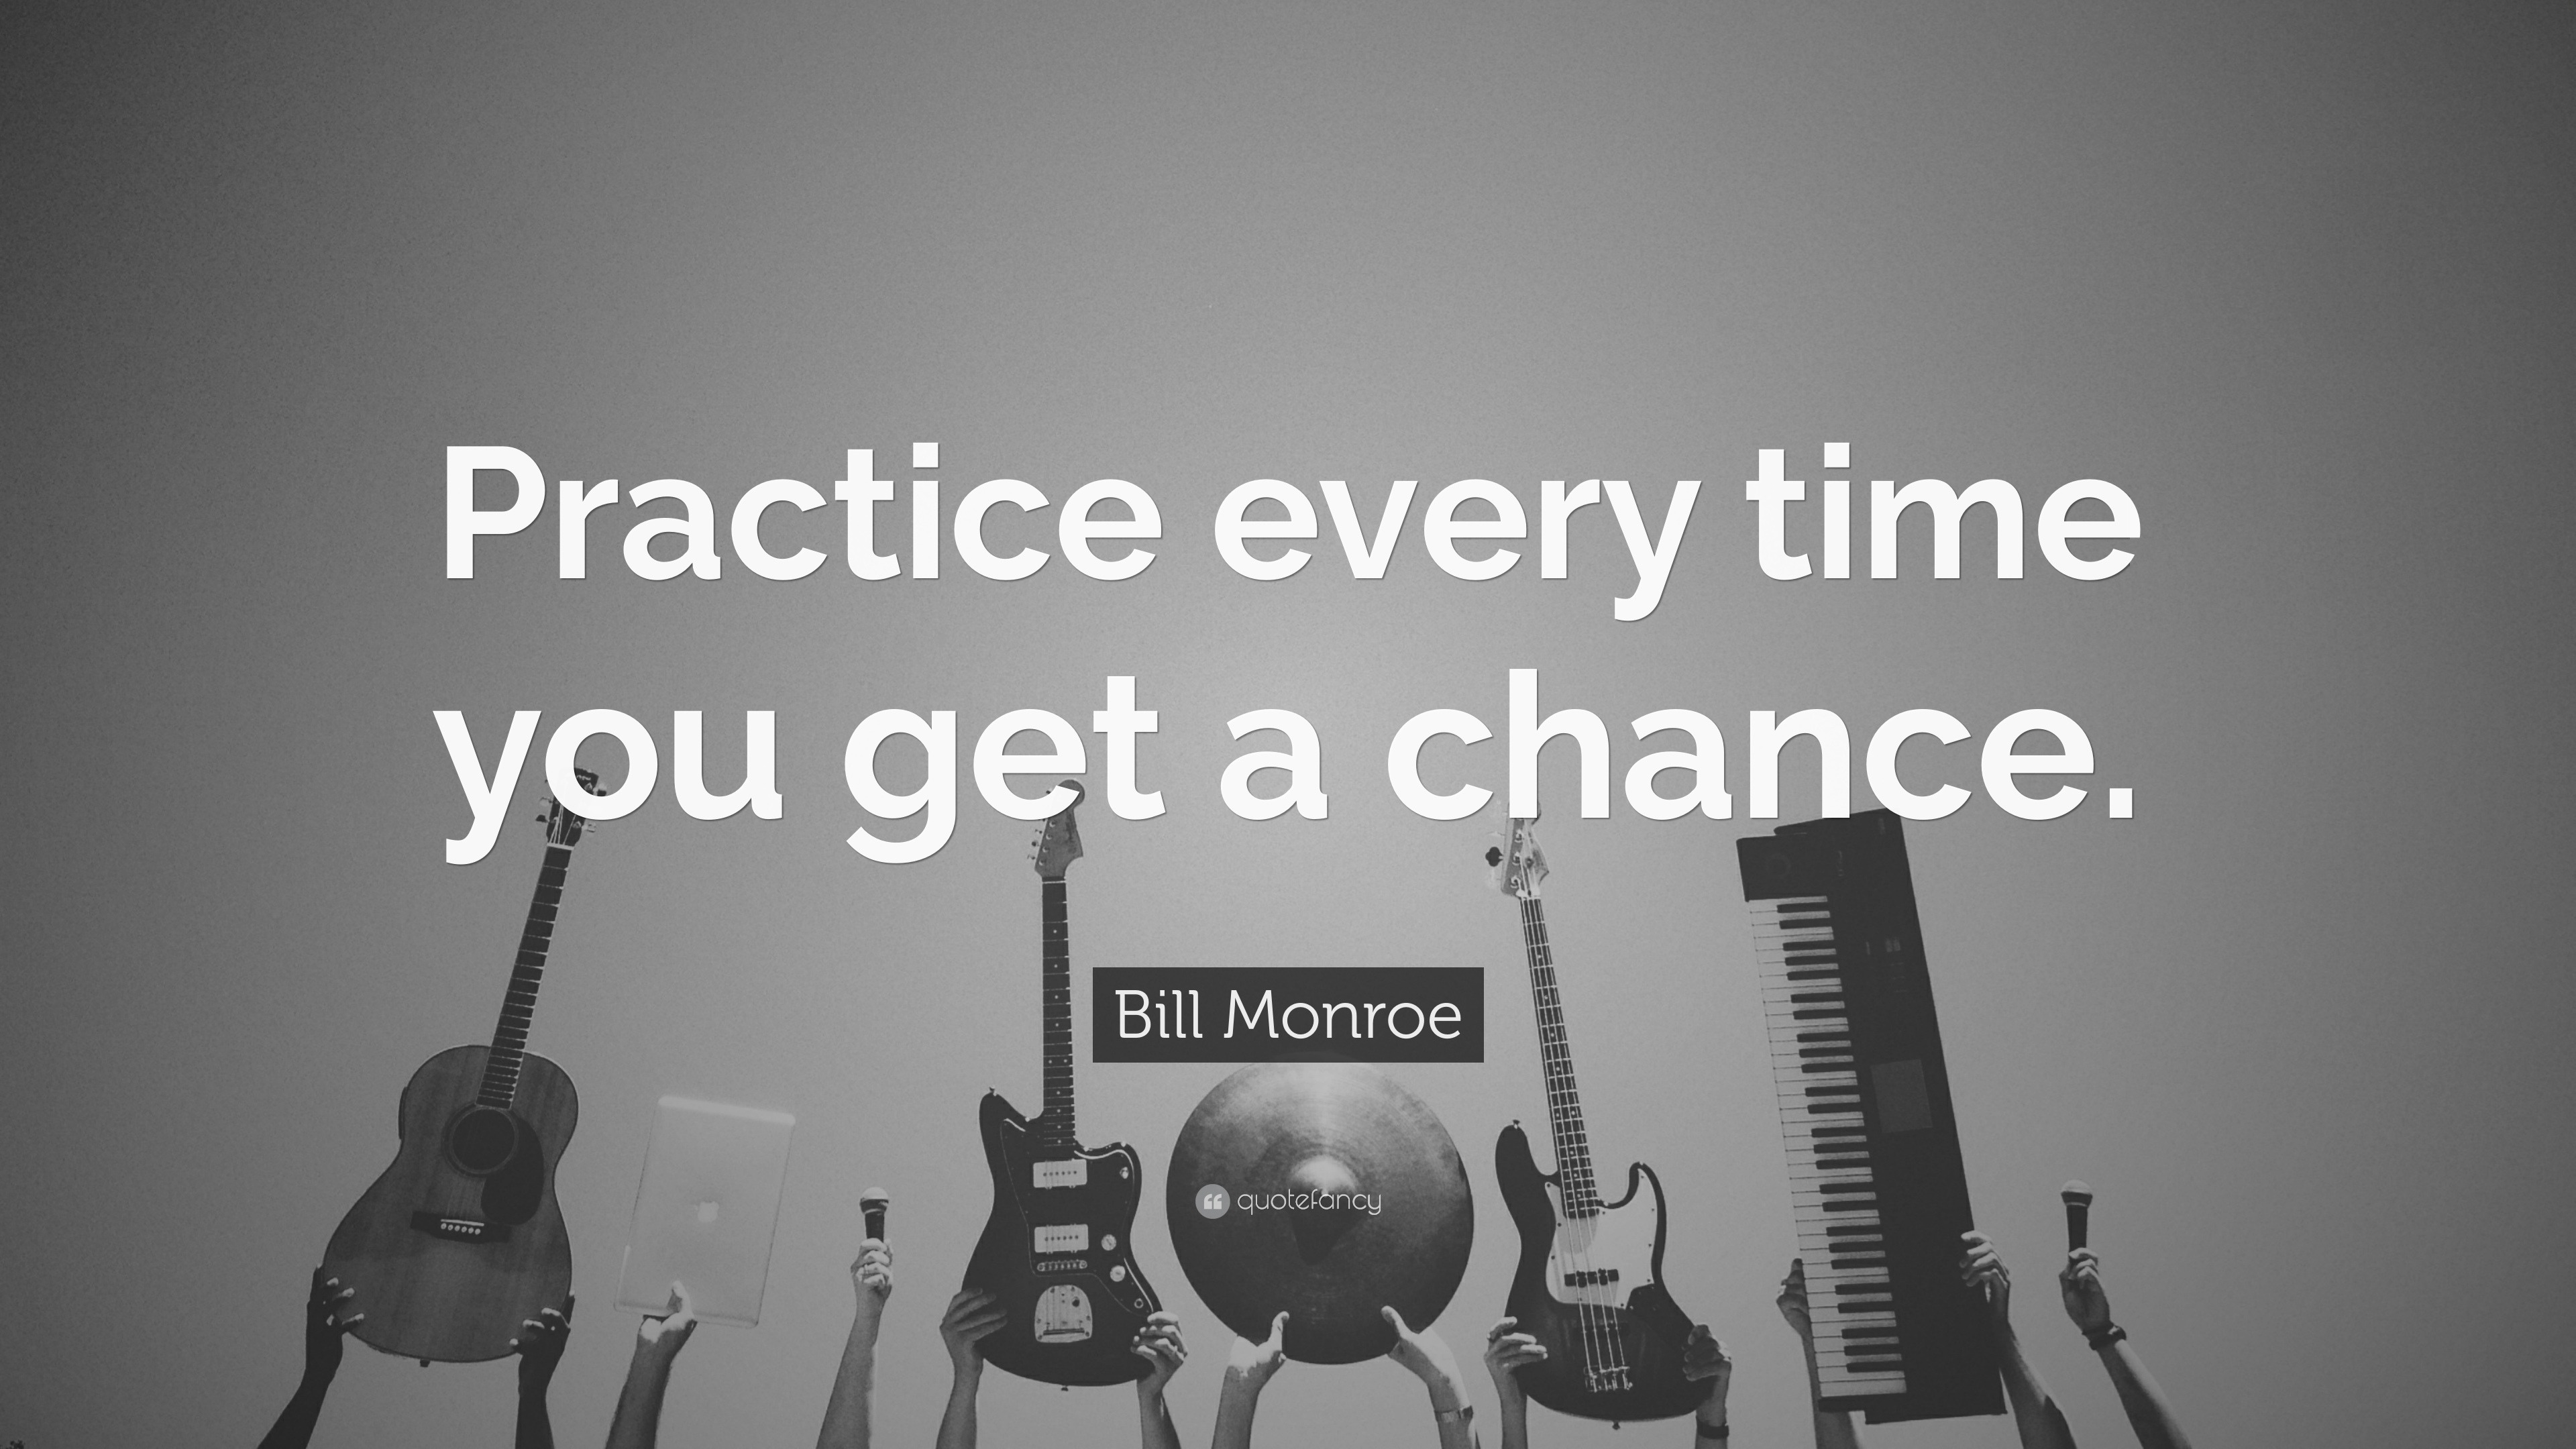 Bill Monroe Quote: “Practice every time you get a chance.”